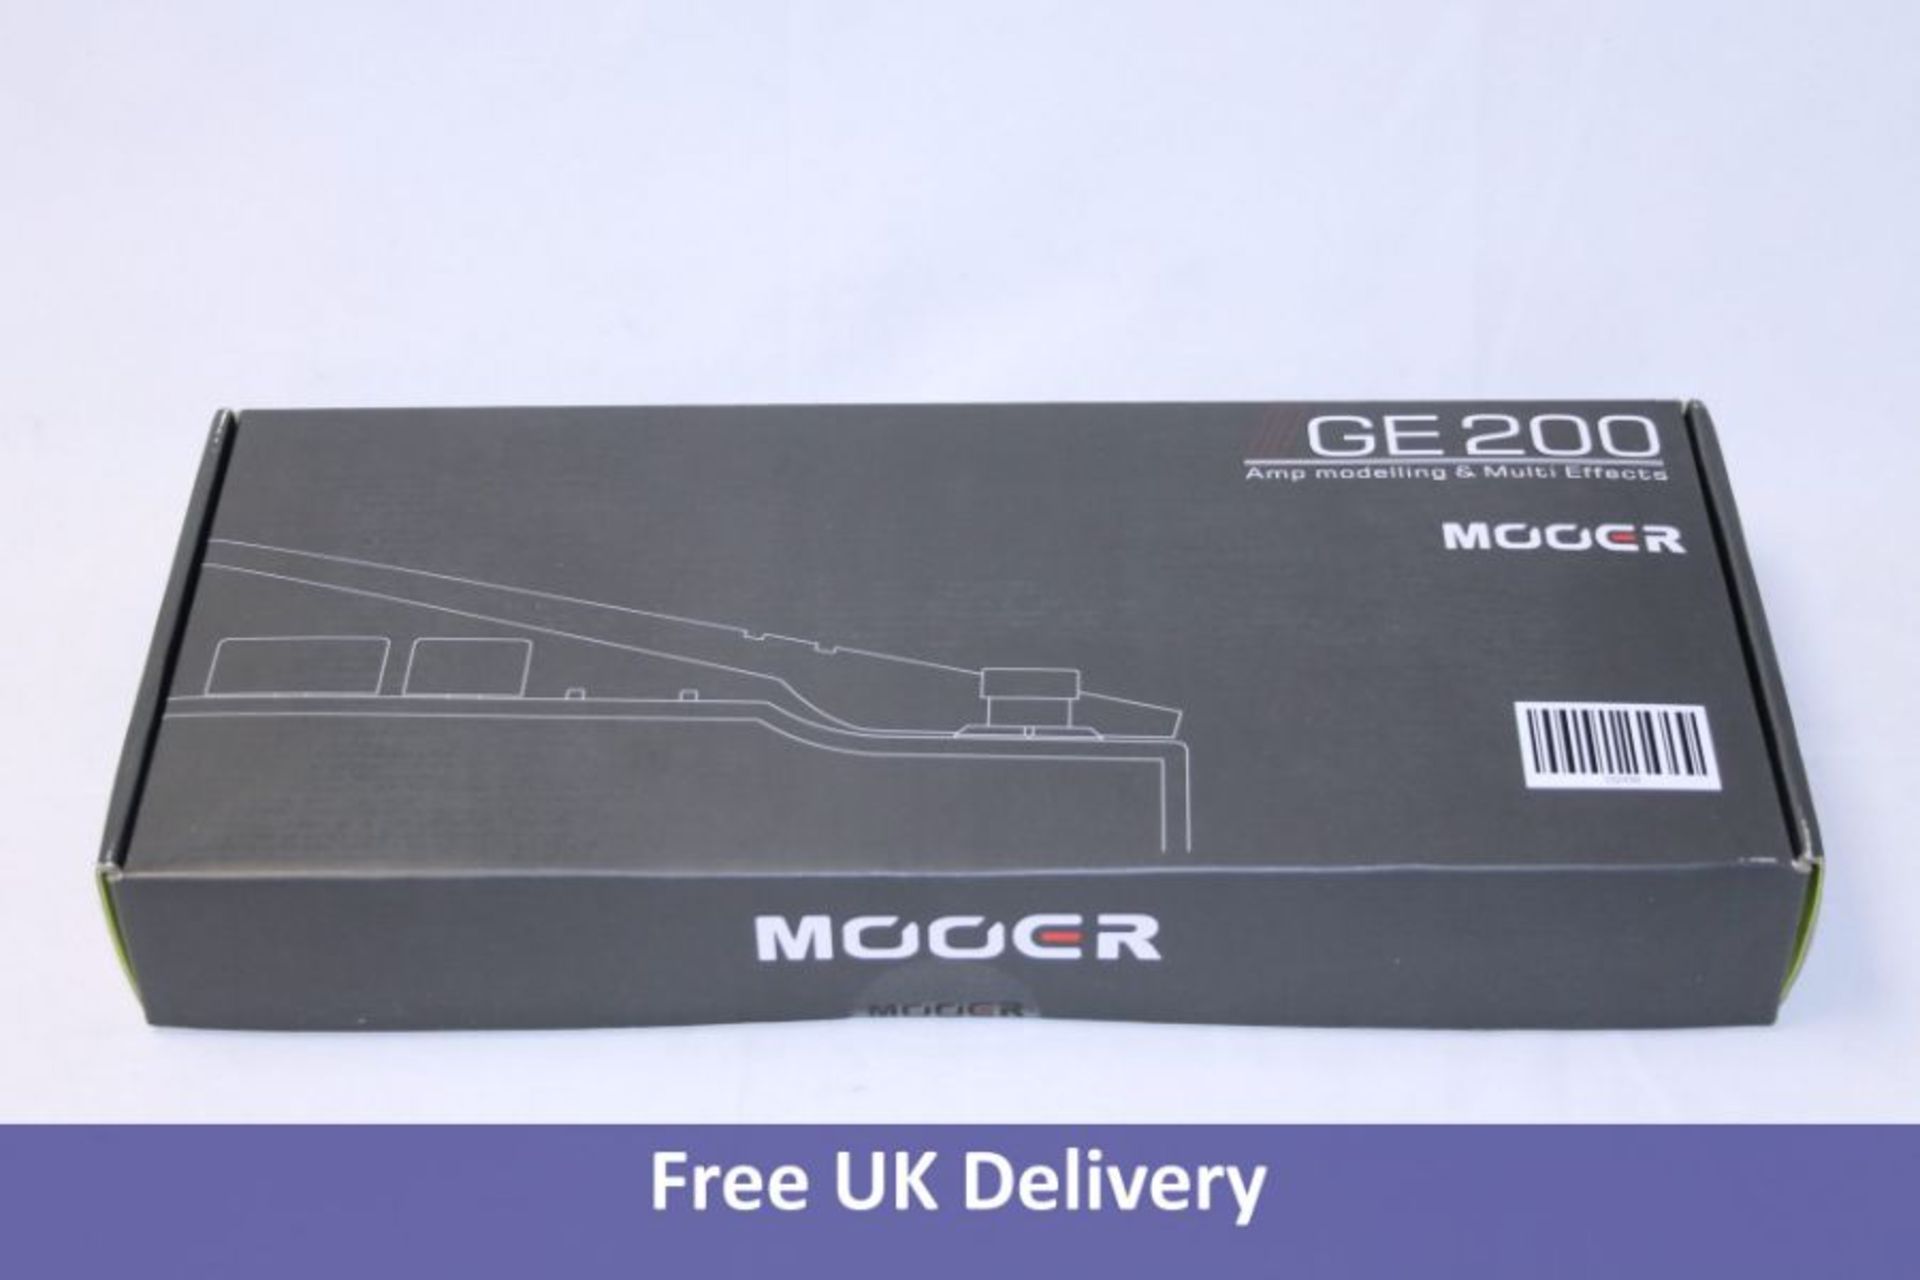 Mooer GE200 Amp Modelling and Multi-Effects